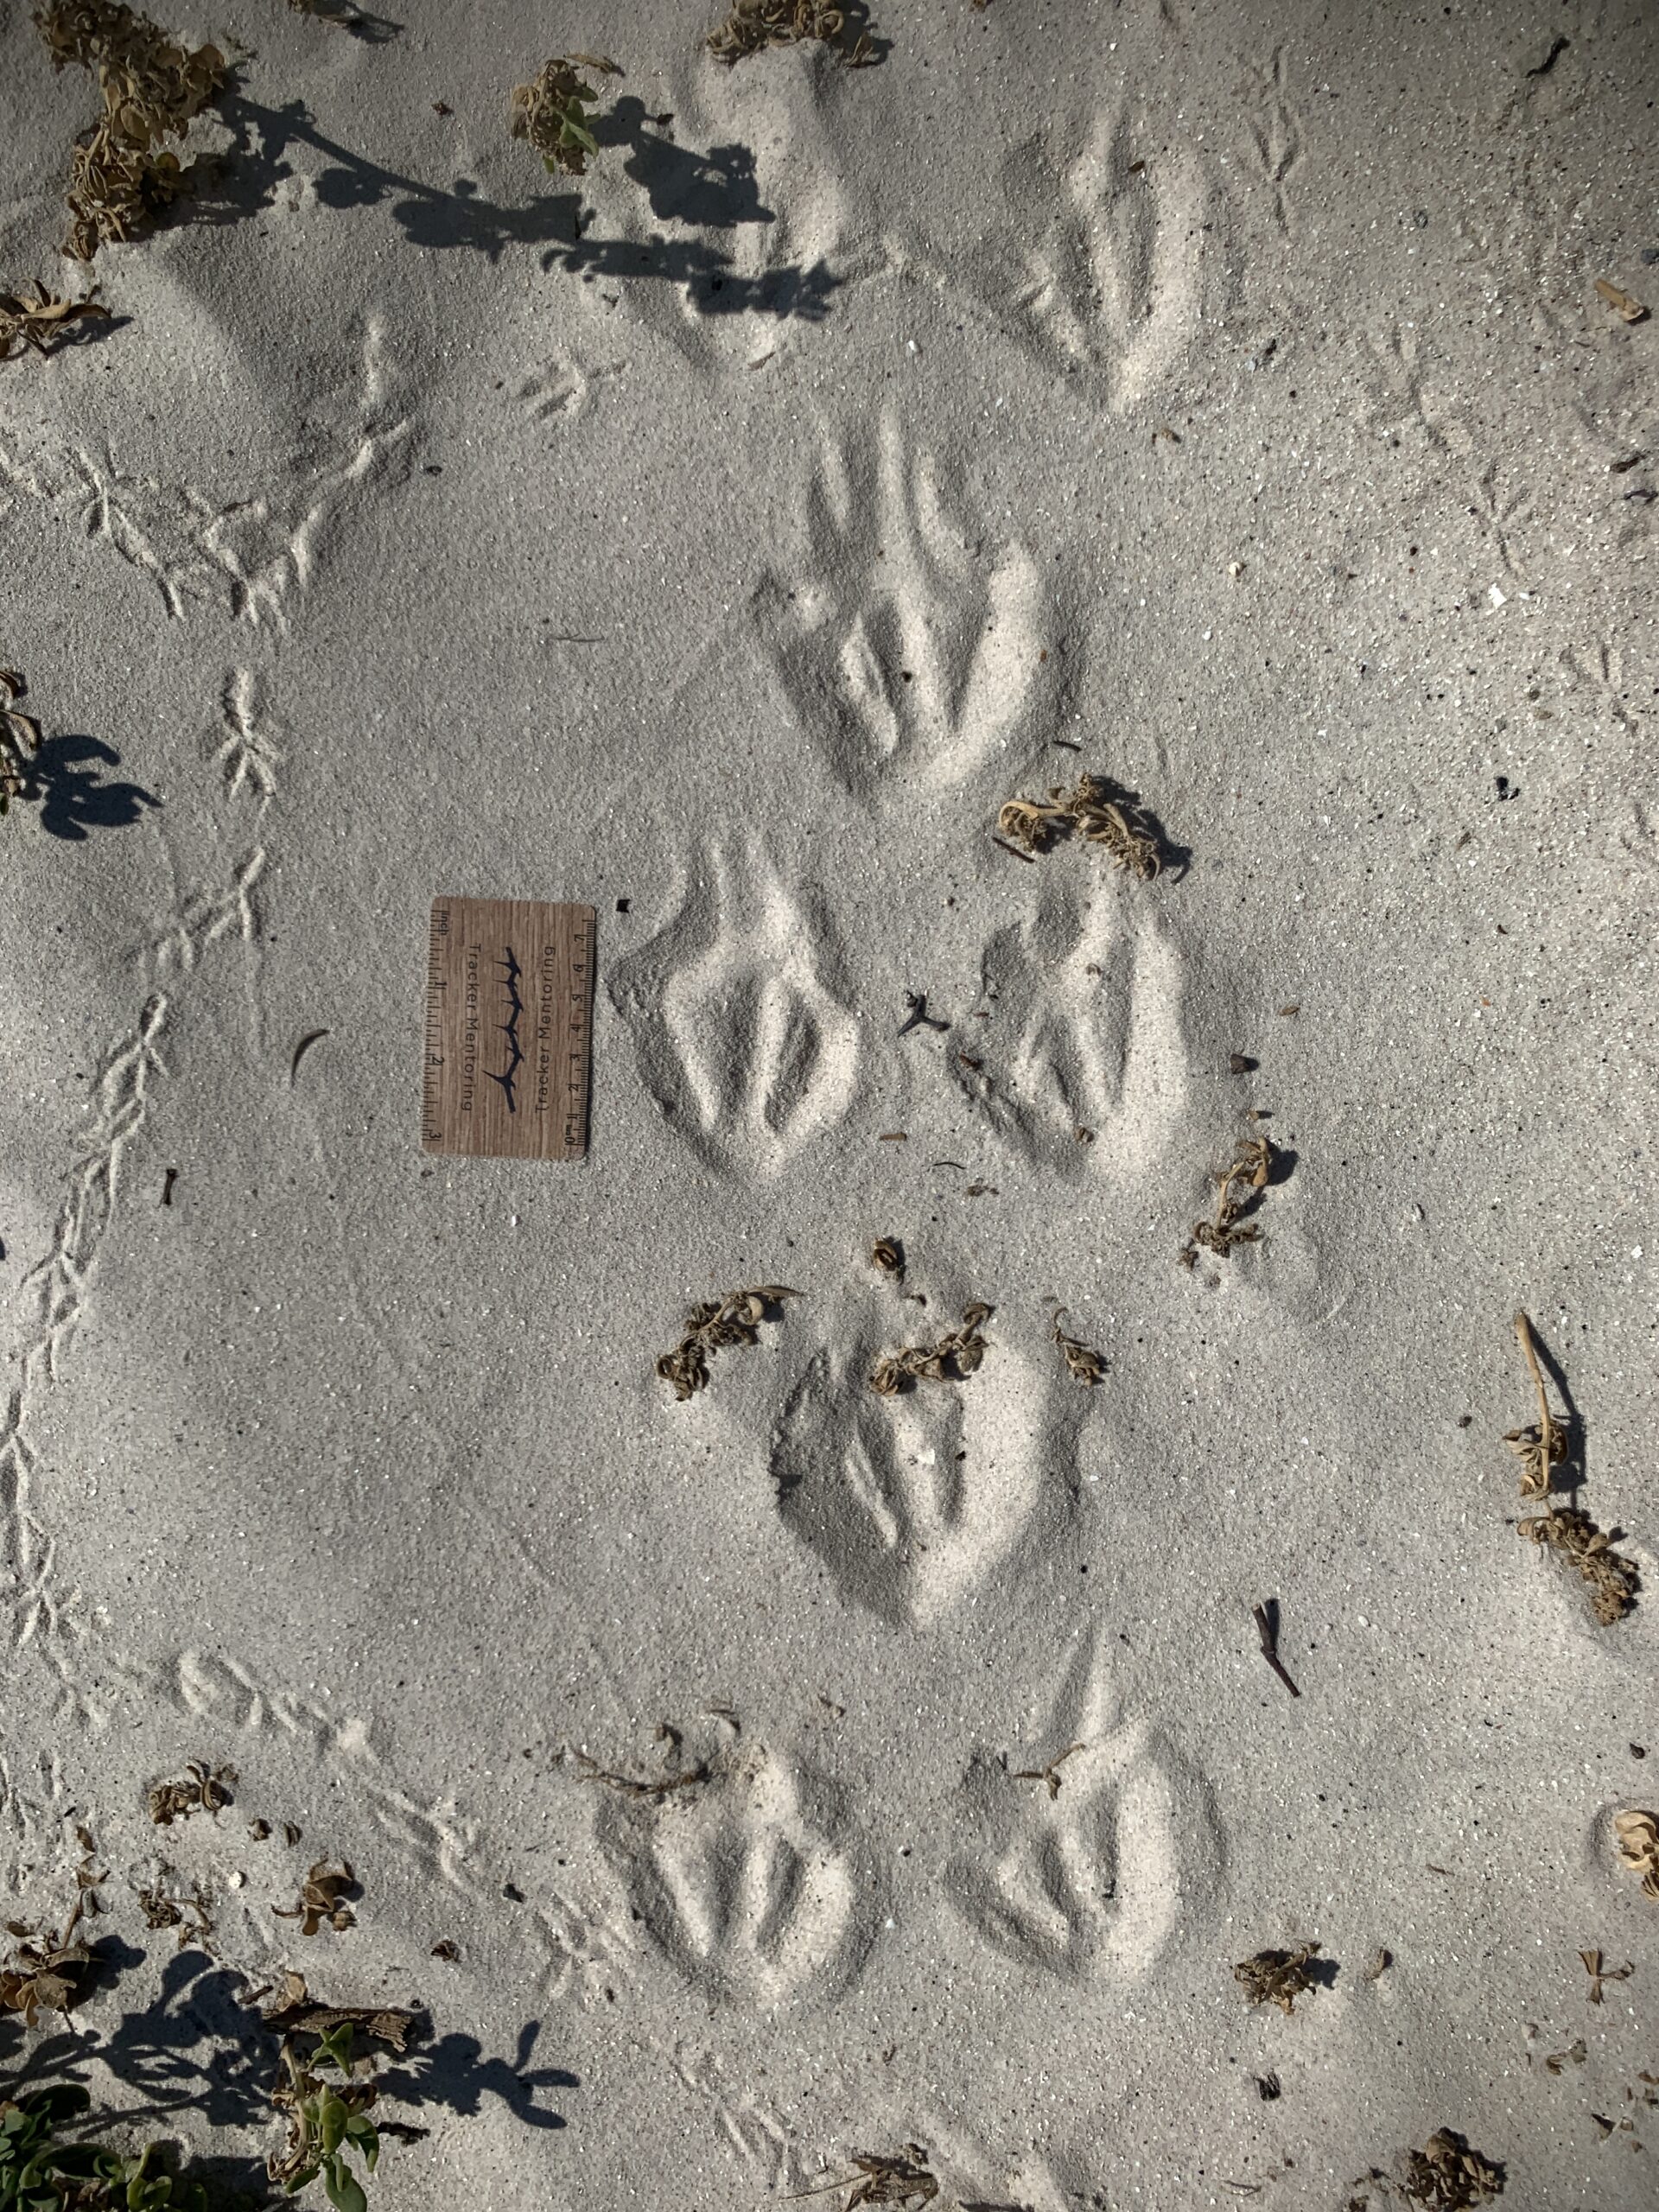 African penguin tracks, Boulders Beach, Cape Town, South Africa